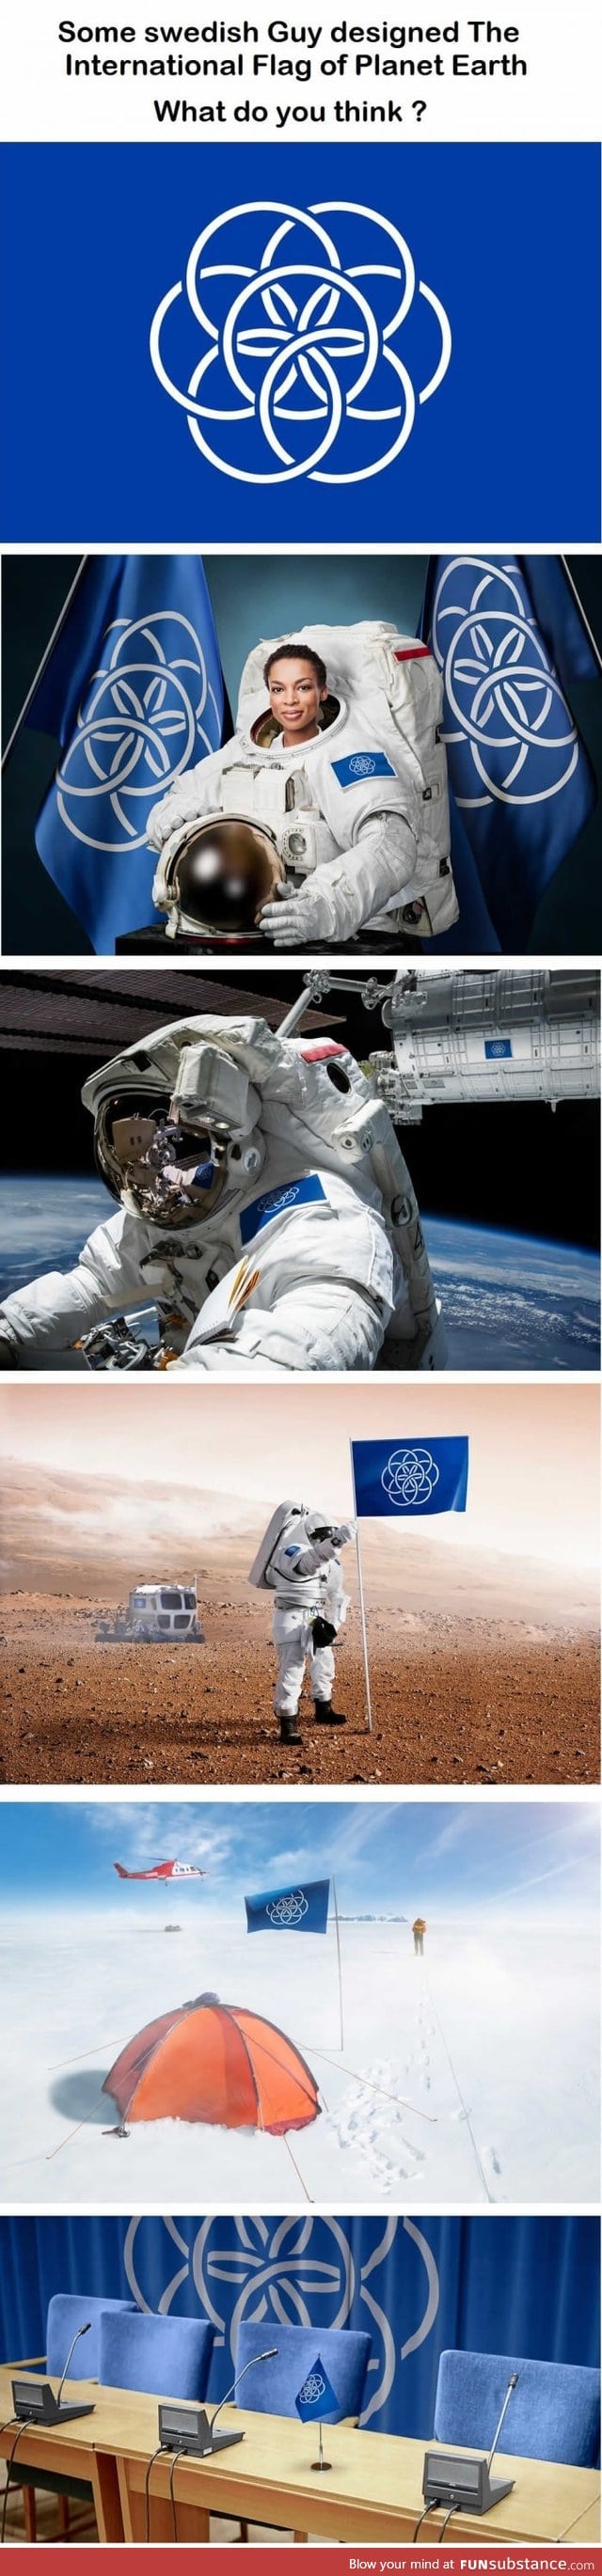 The International Flag of Planet Earth